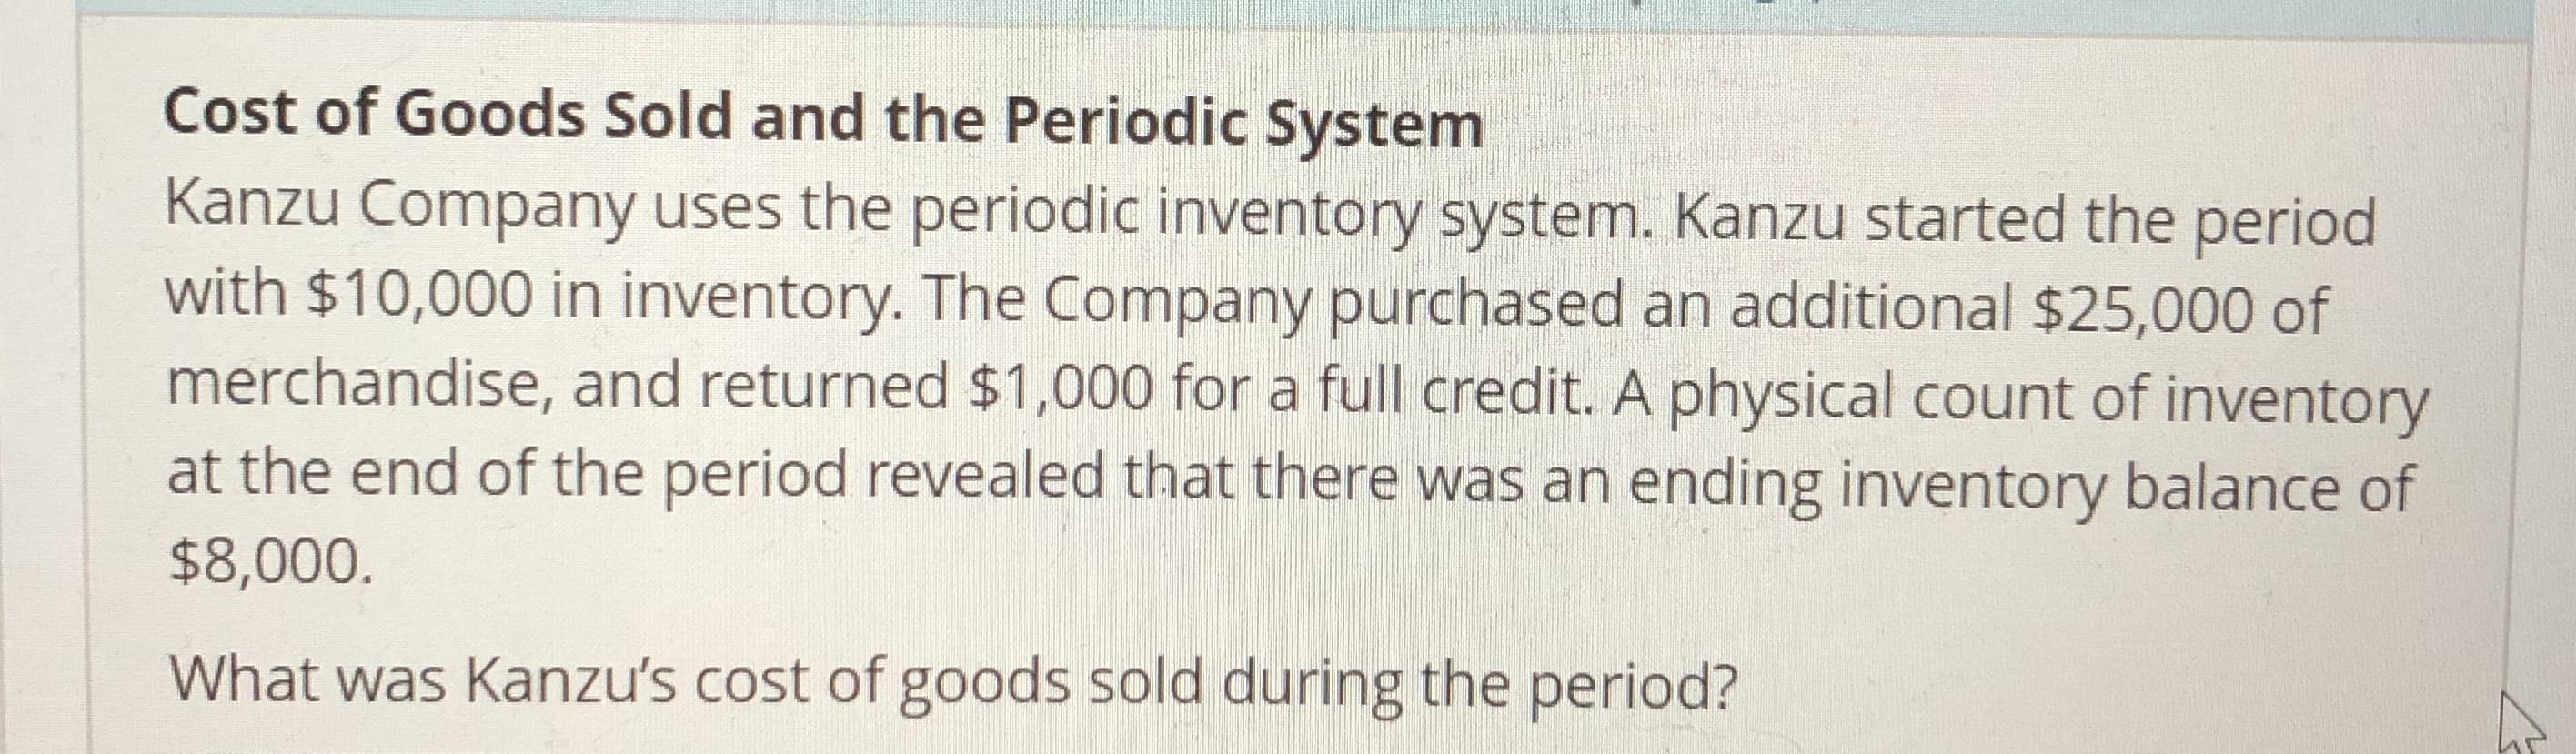 Cost of Goods Sold and the Periodic System
Kanzu Company uses the periodic inventory system. Kanzu started the period
with $10,000 in inventory. The Company purchased an additional $25,000 of
merchandise, and returned $1,000 for a full credit. A physical count of inventory
at the end of the period revealed that there was an ending inventory balance of
$8,000
What was Kanzu's cost of goods sold during the period?
